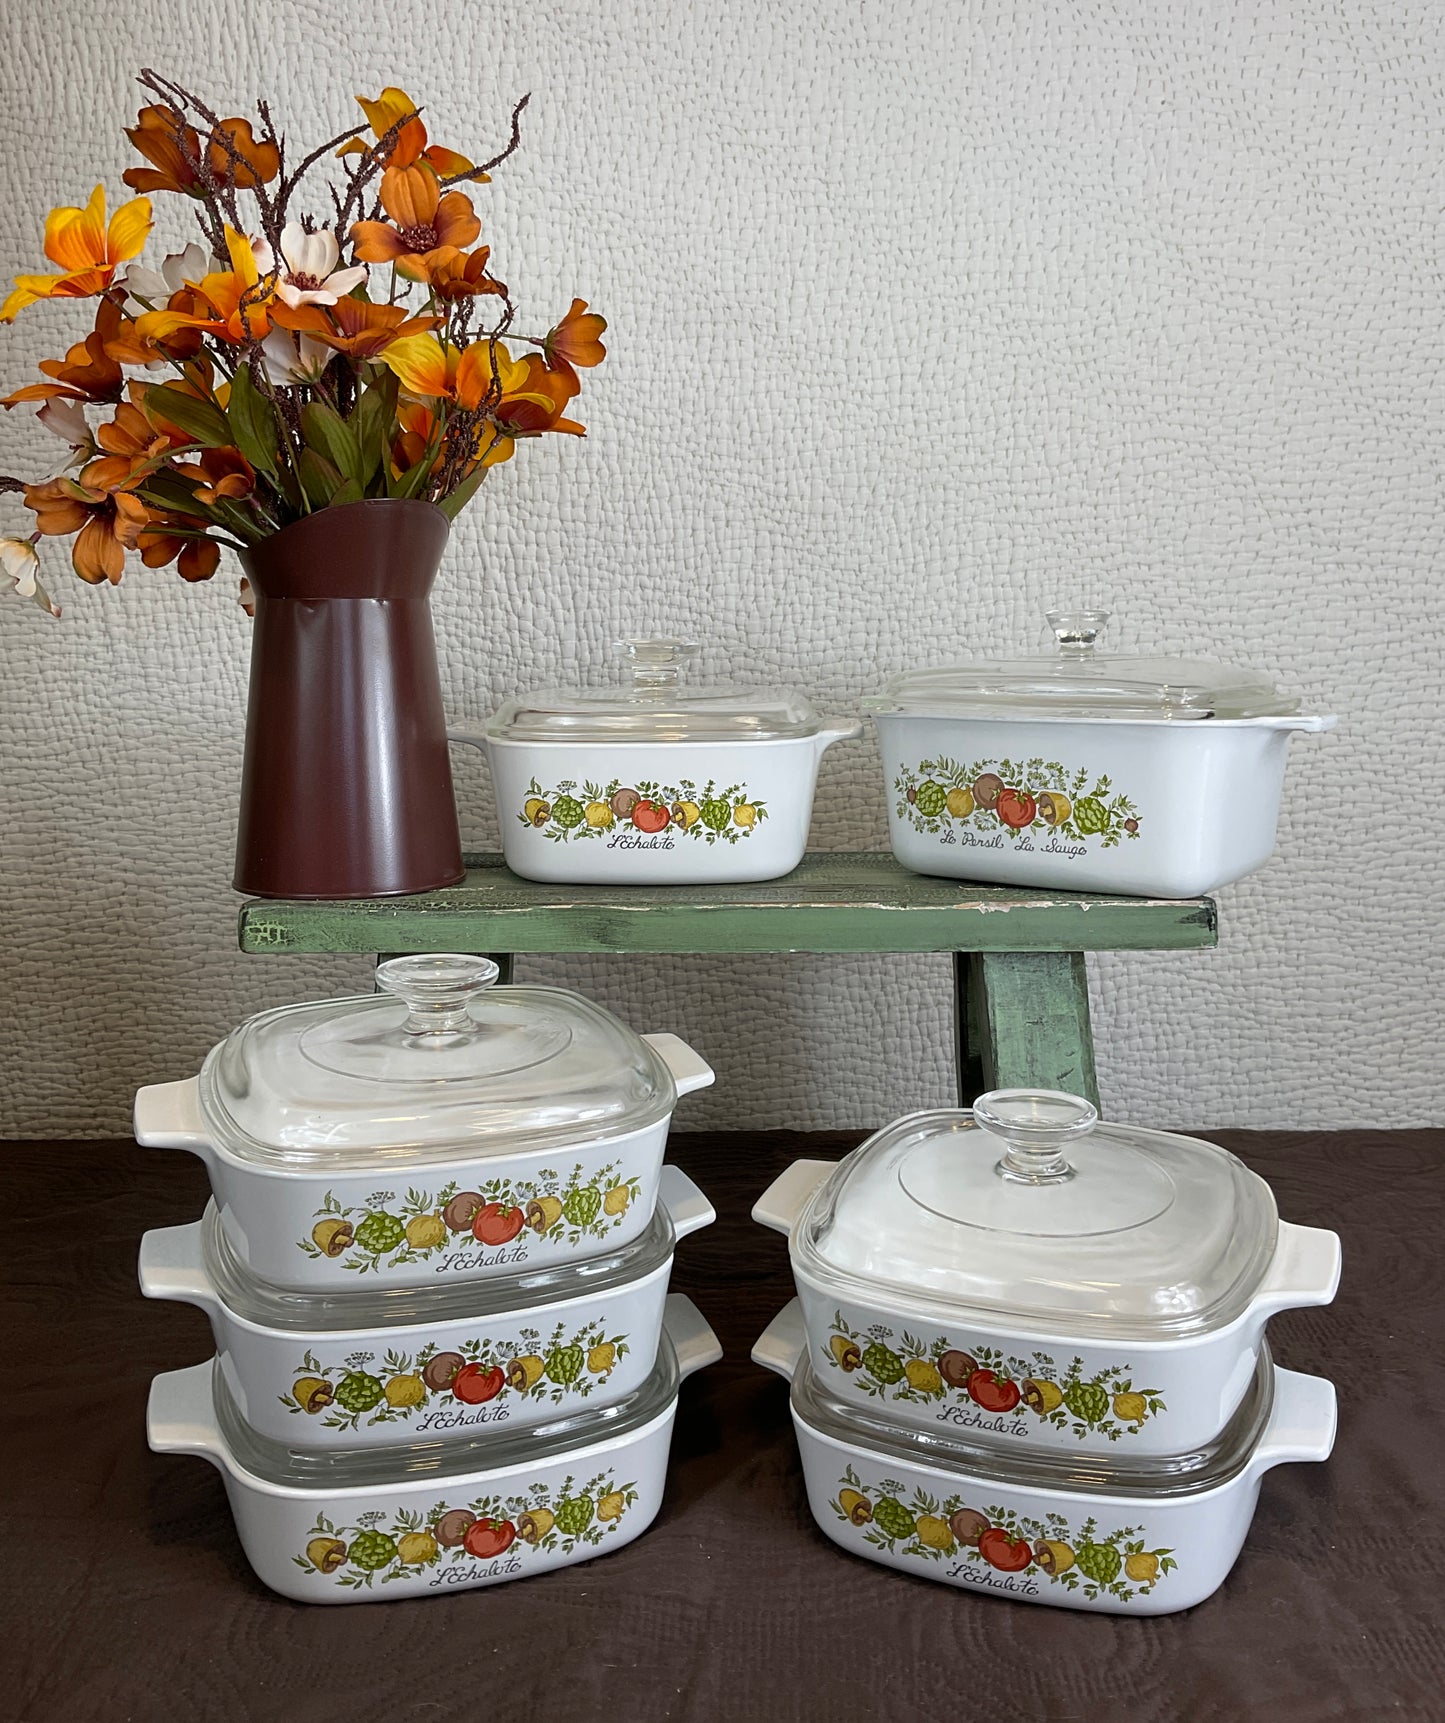 Corning Ware Spice of Life Casserole Dishes W/ Lid